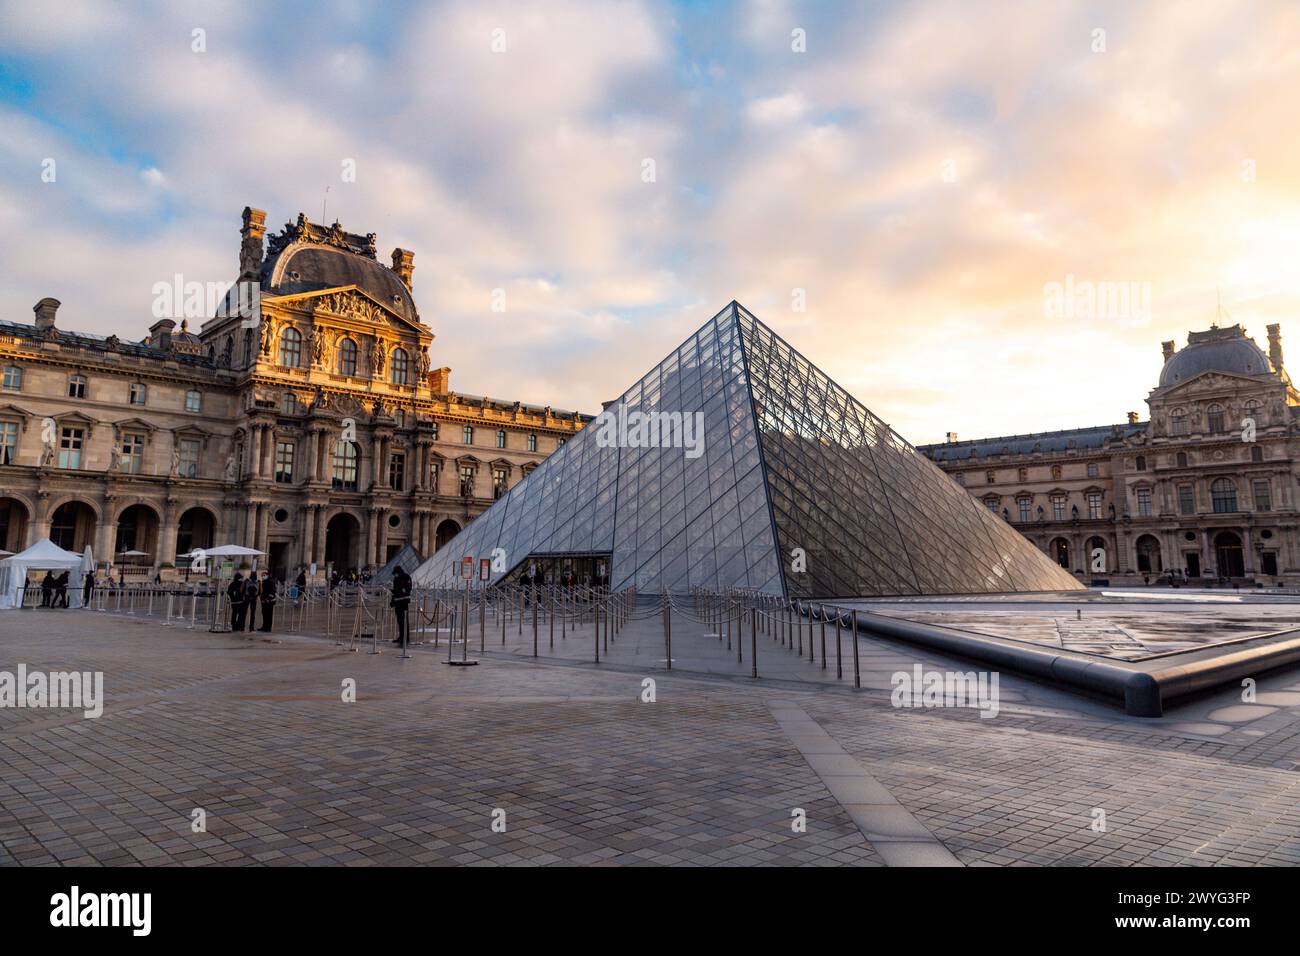 Paris, France - JAN 20, 2022: The glass pyramid of Louvre Museum, the main entrance to famous museum and gallery, completed in 1989. A beautiful winte Stock Photo